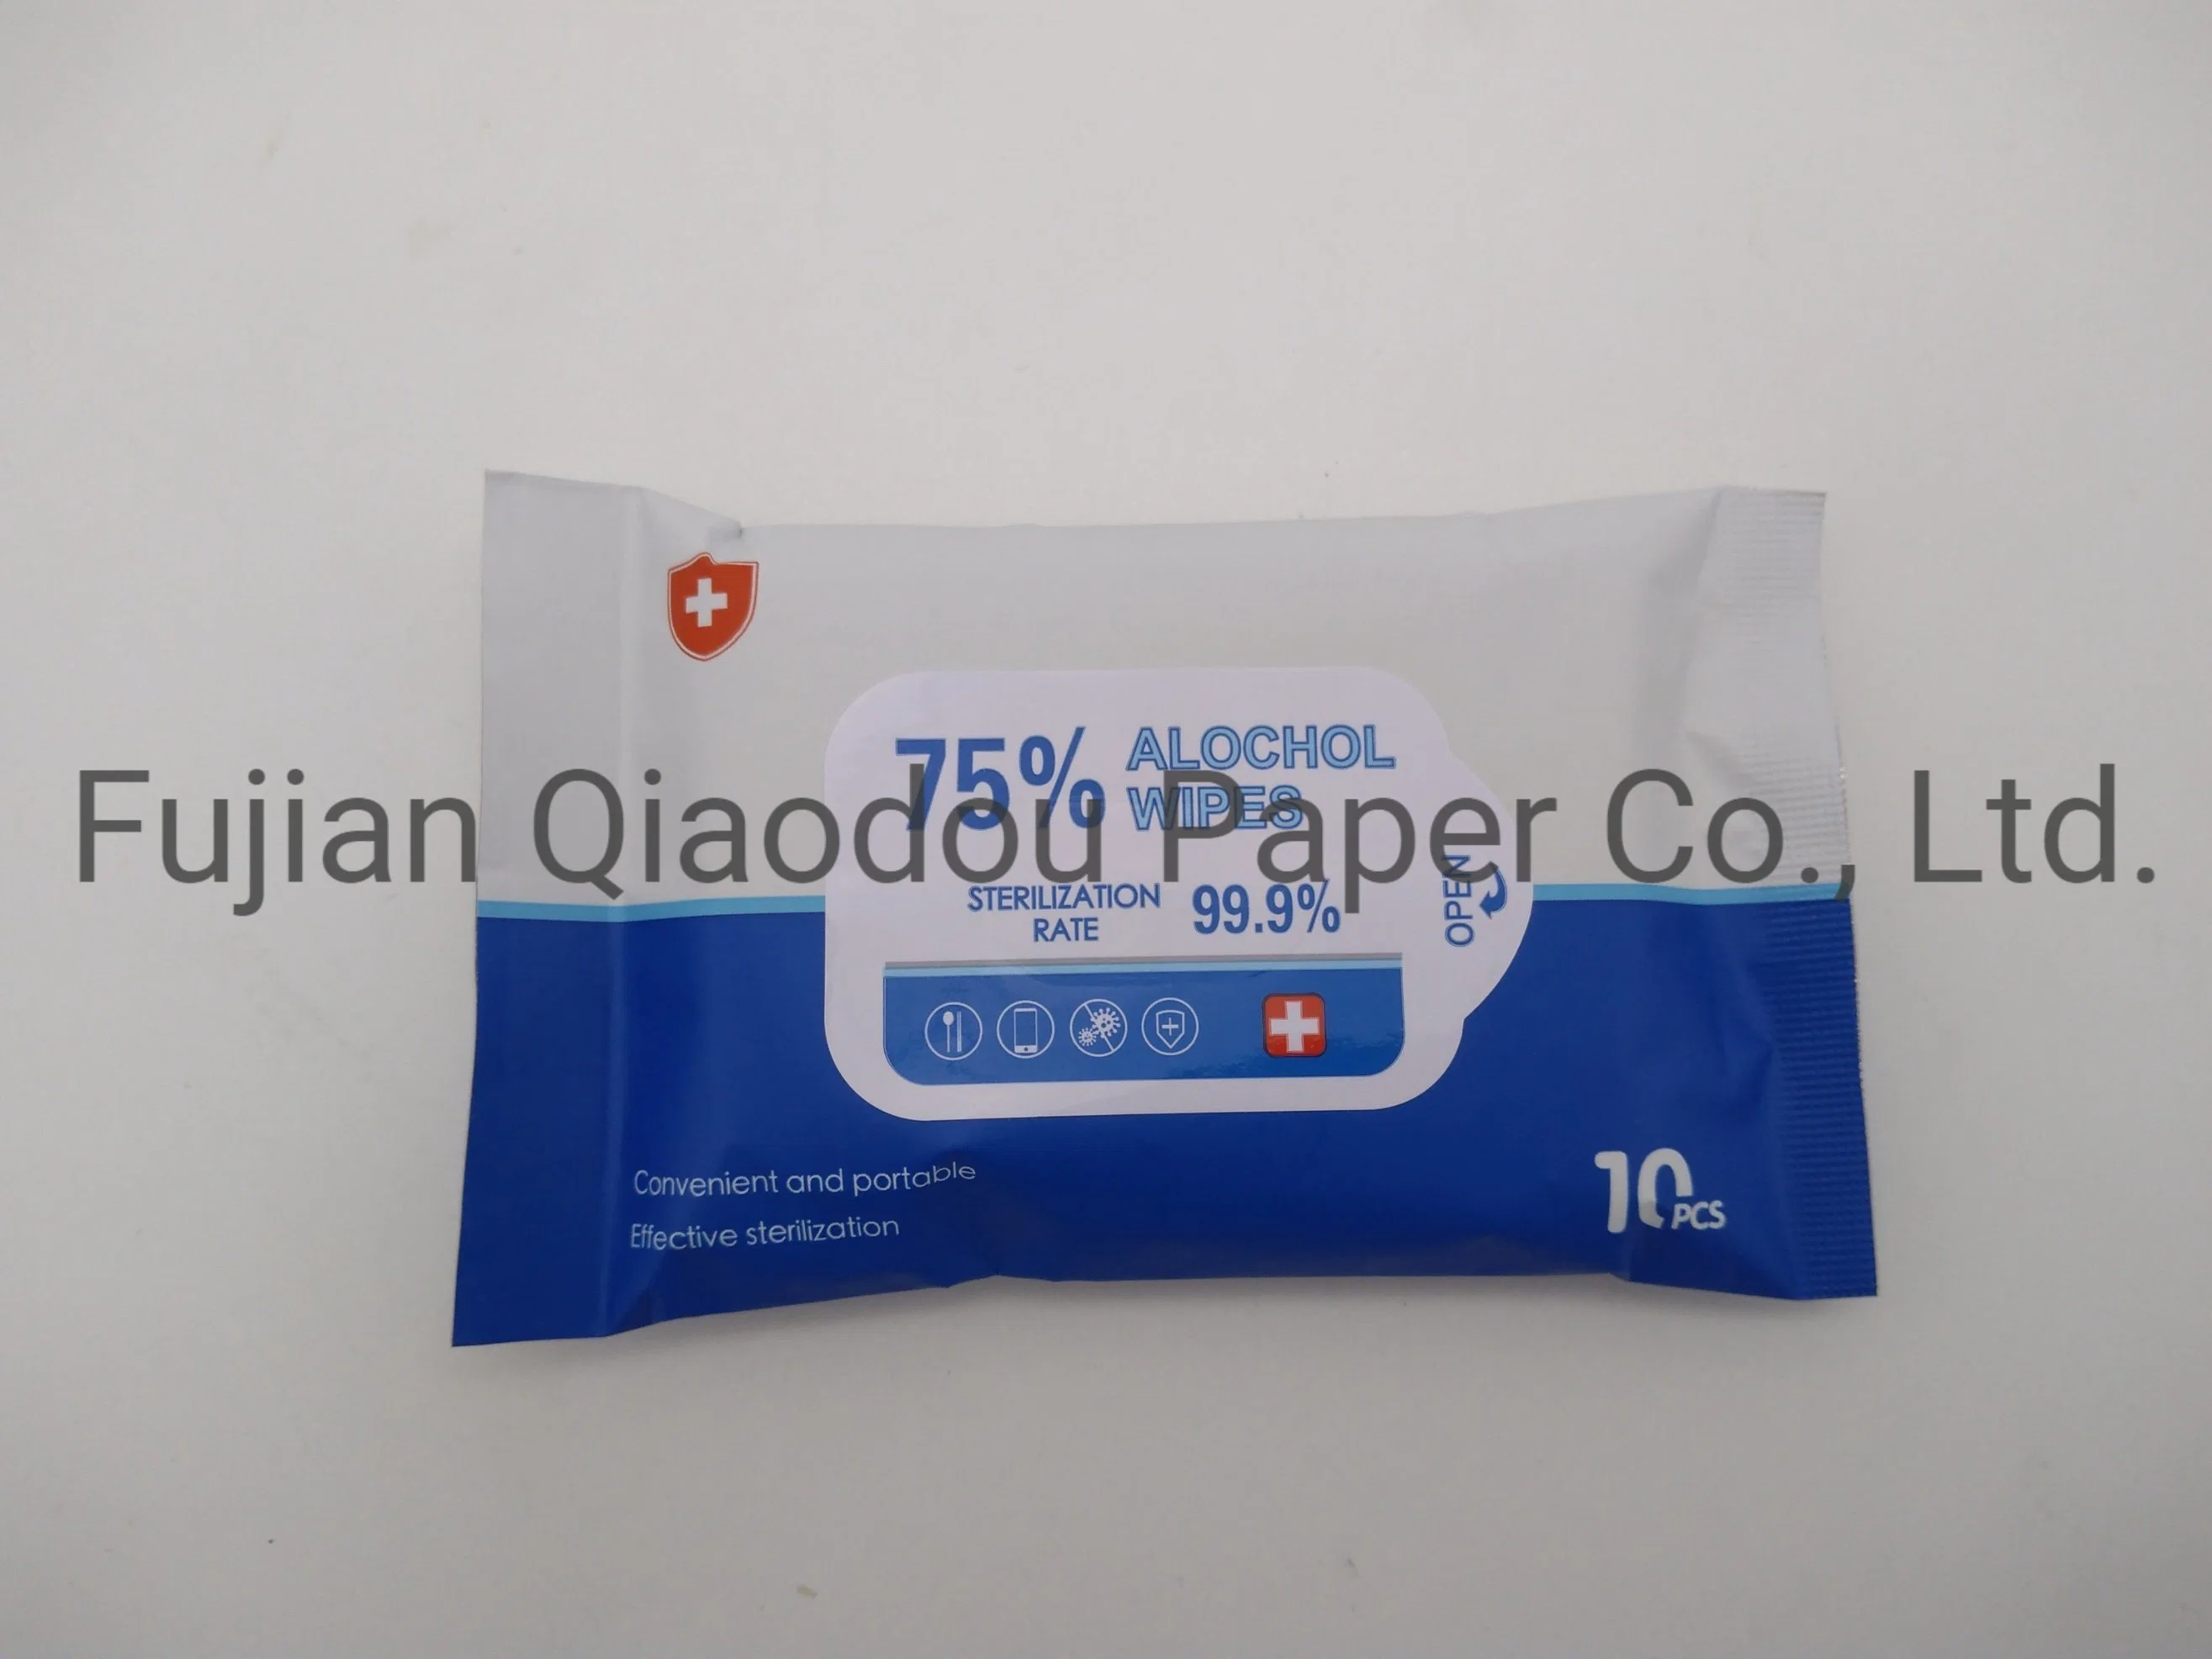 Qiaodou Household Cleaning Wet Tissue Disposable Antibacterial Cleaning Disinfectant Wipe Hospital School Sanitizer 75% Alcohol Wet Wipes